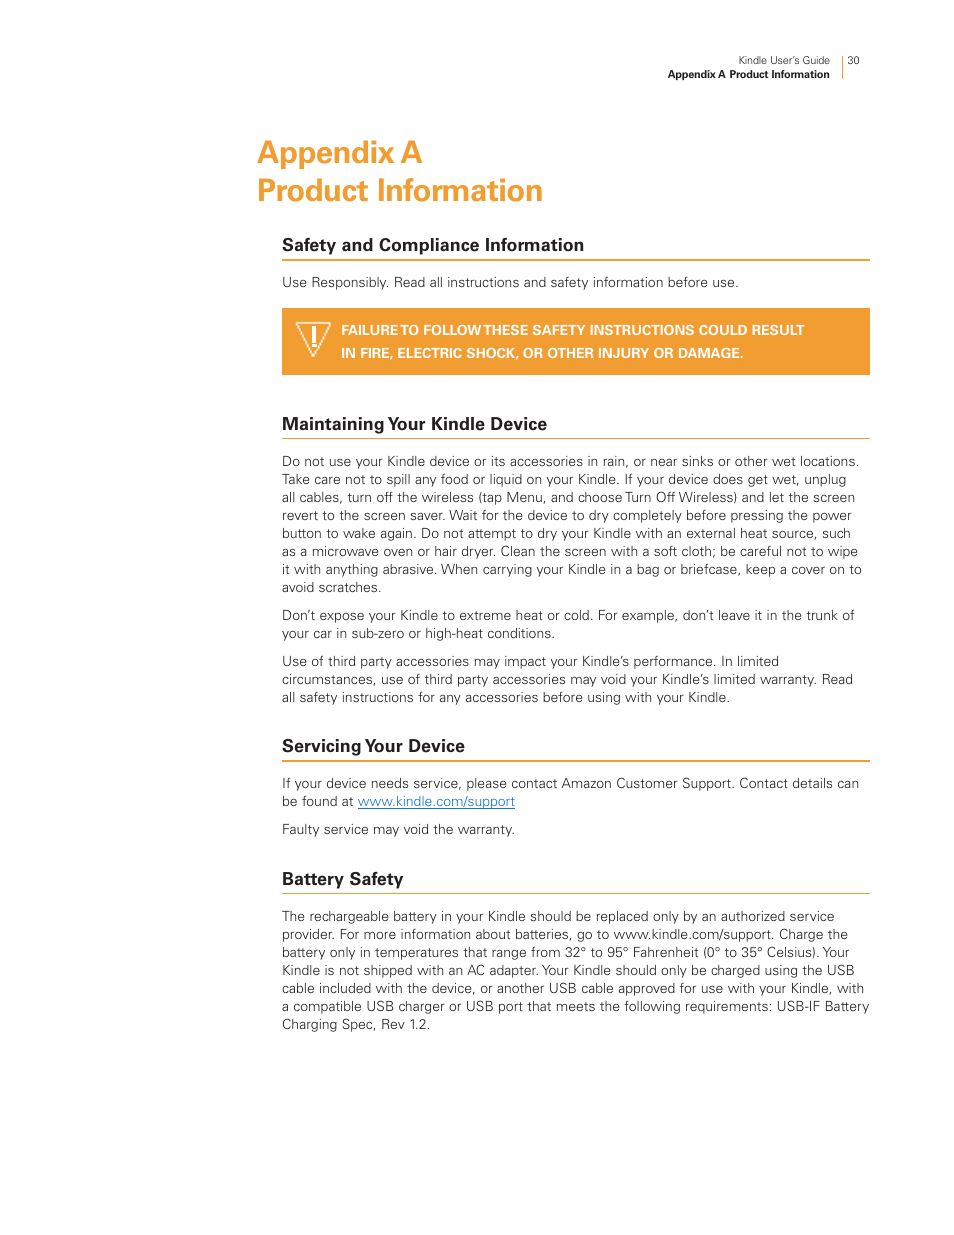 Appendix a product information, Safety and compliance information, Maintaining your kindle device | Servicing your device, Battery safety | Kindle Touch 3G User Manual | Page 30 / 36